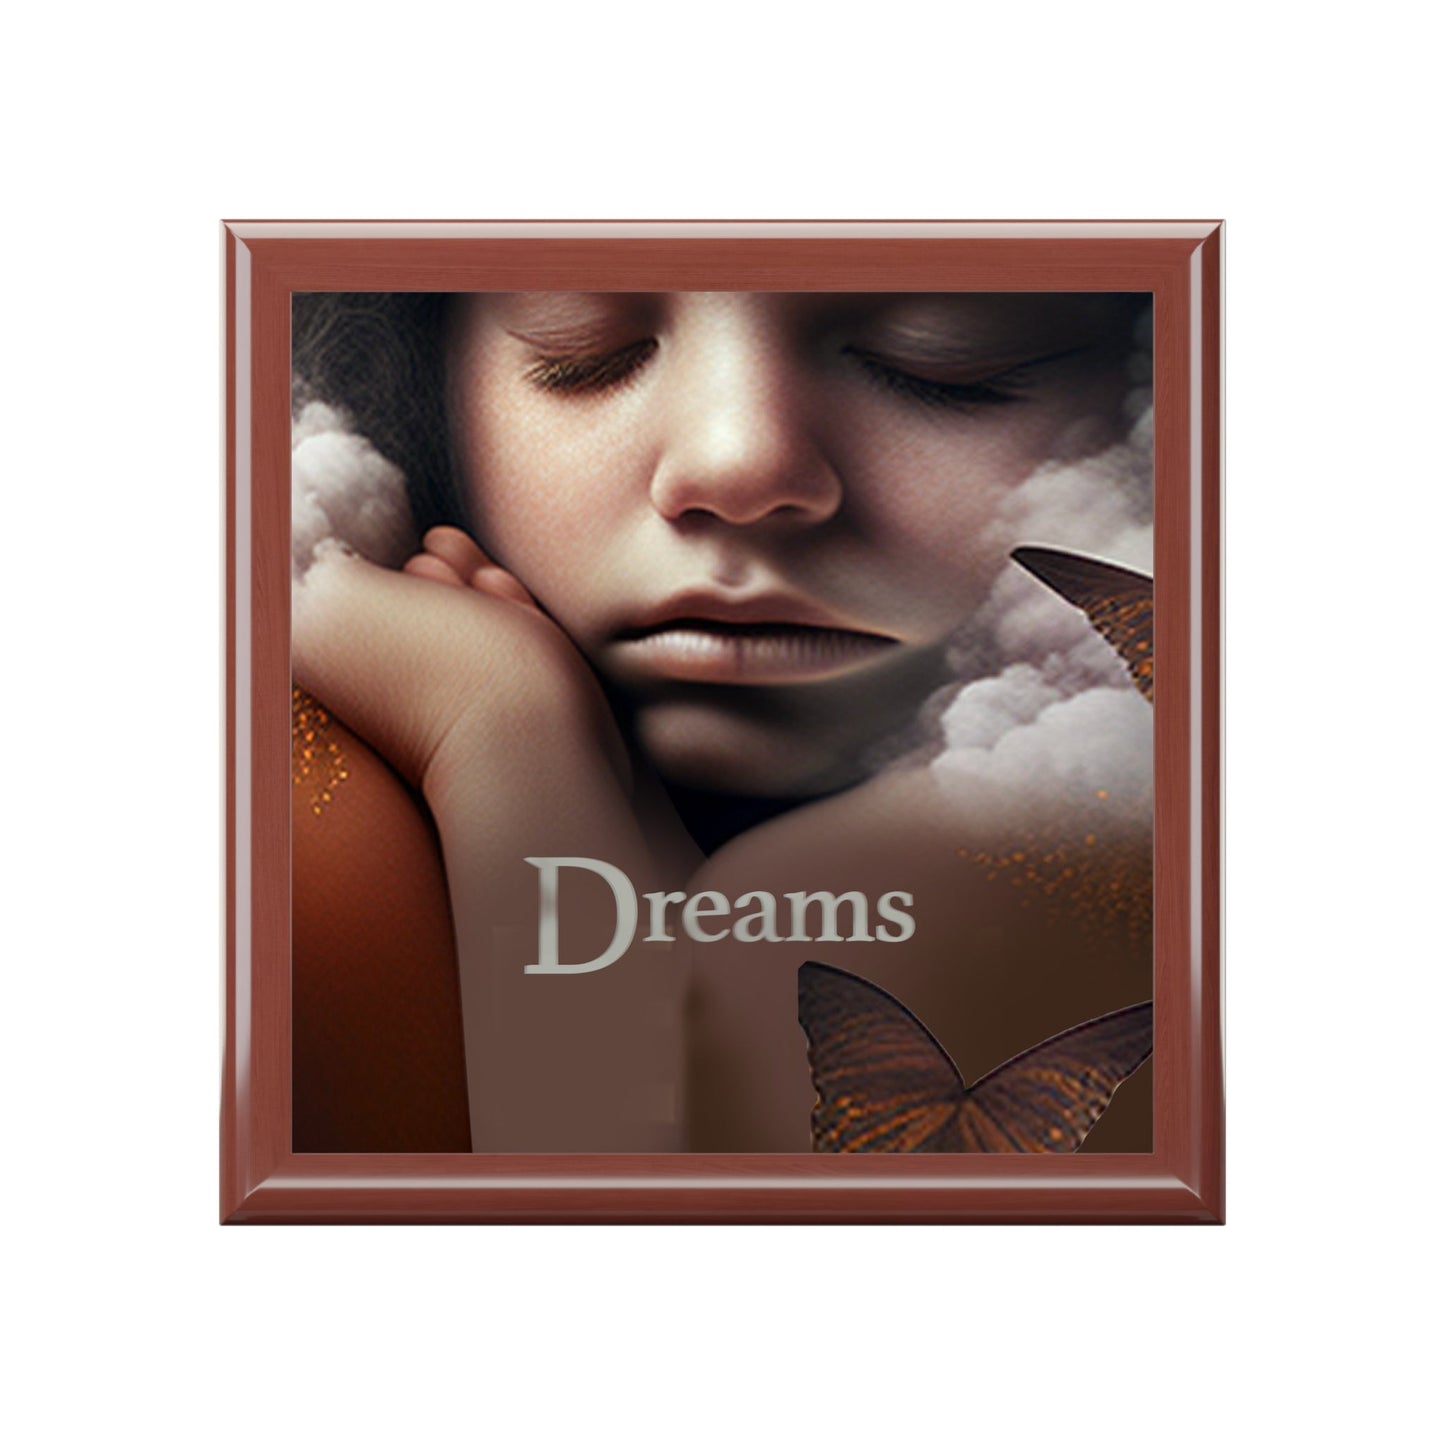 Dreams Keepsake Jewelry Box with Ceramic Tile Cover Beige. Manifest your dreams.